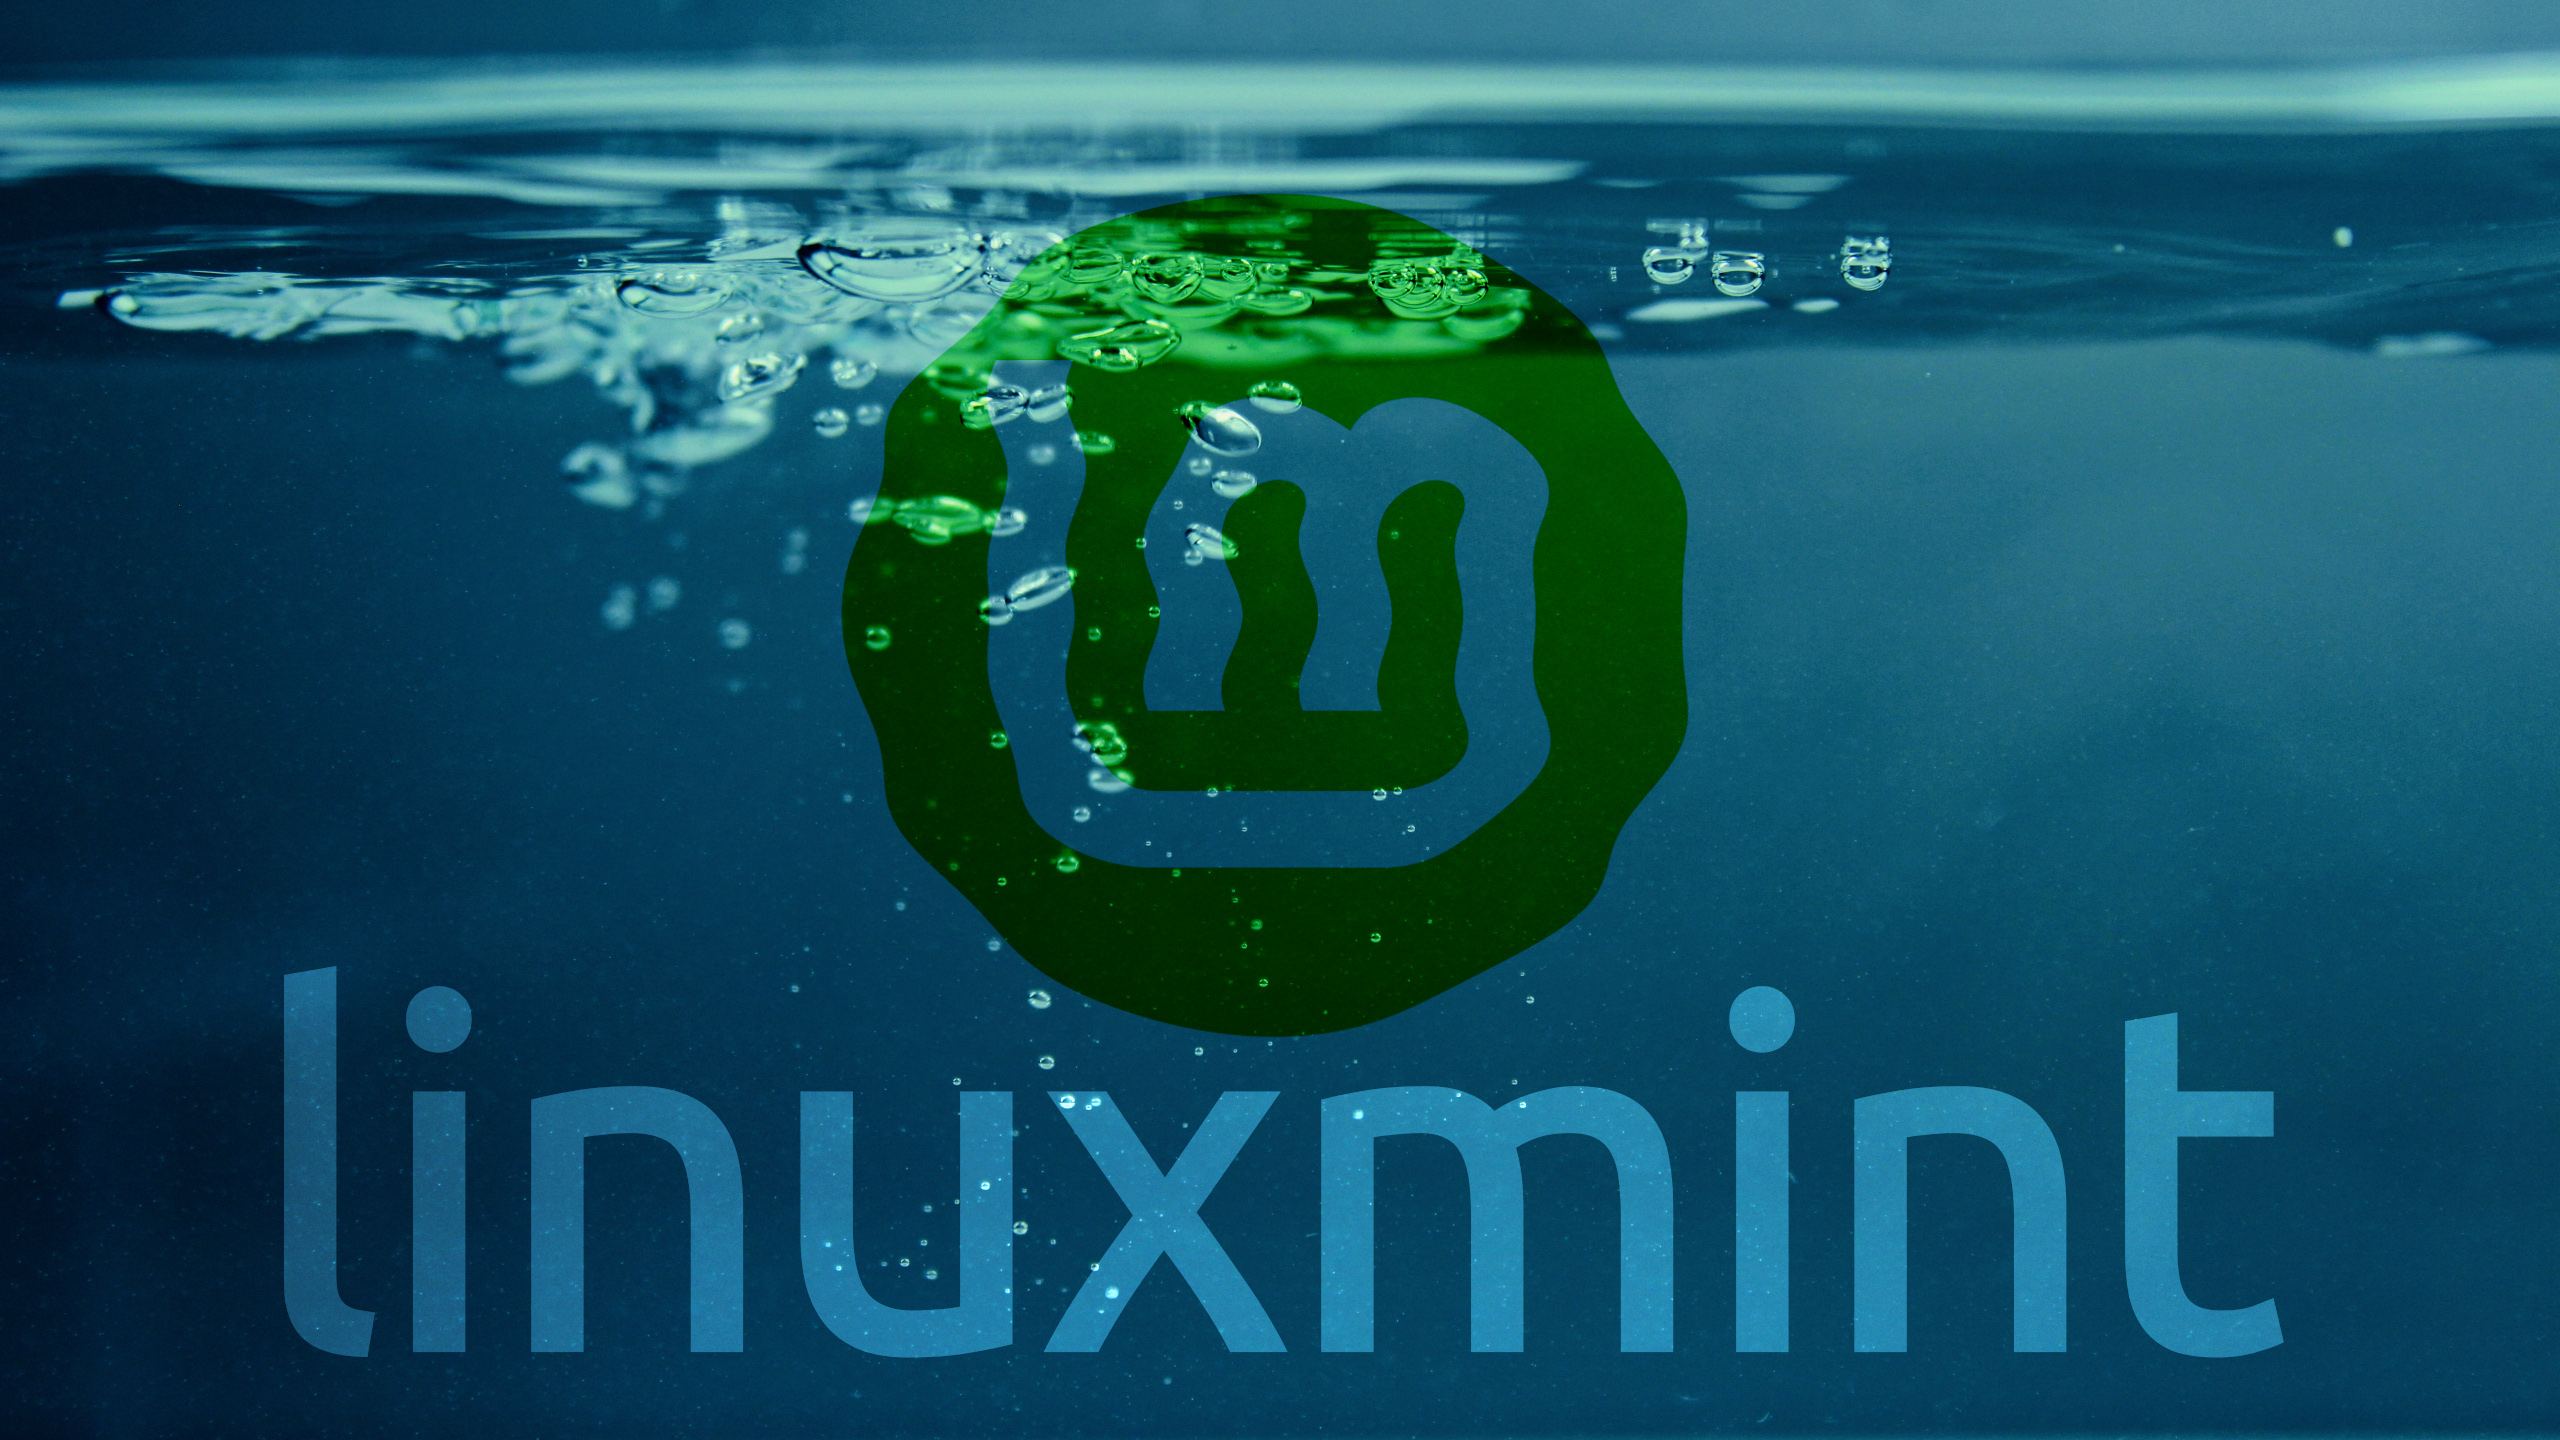 General 2560x1440 Linux Linux Mint water simple background operating system